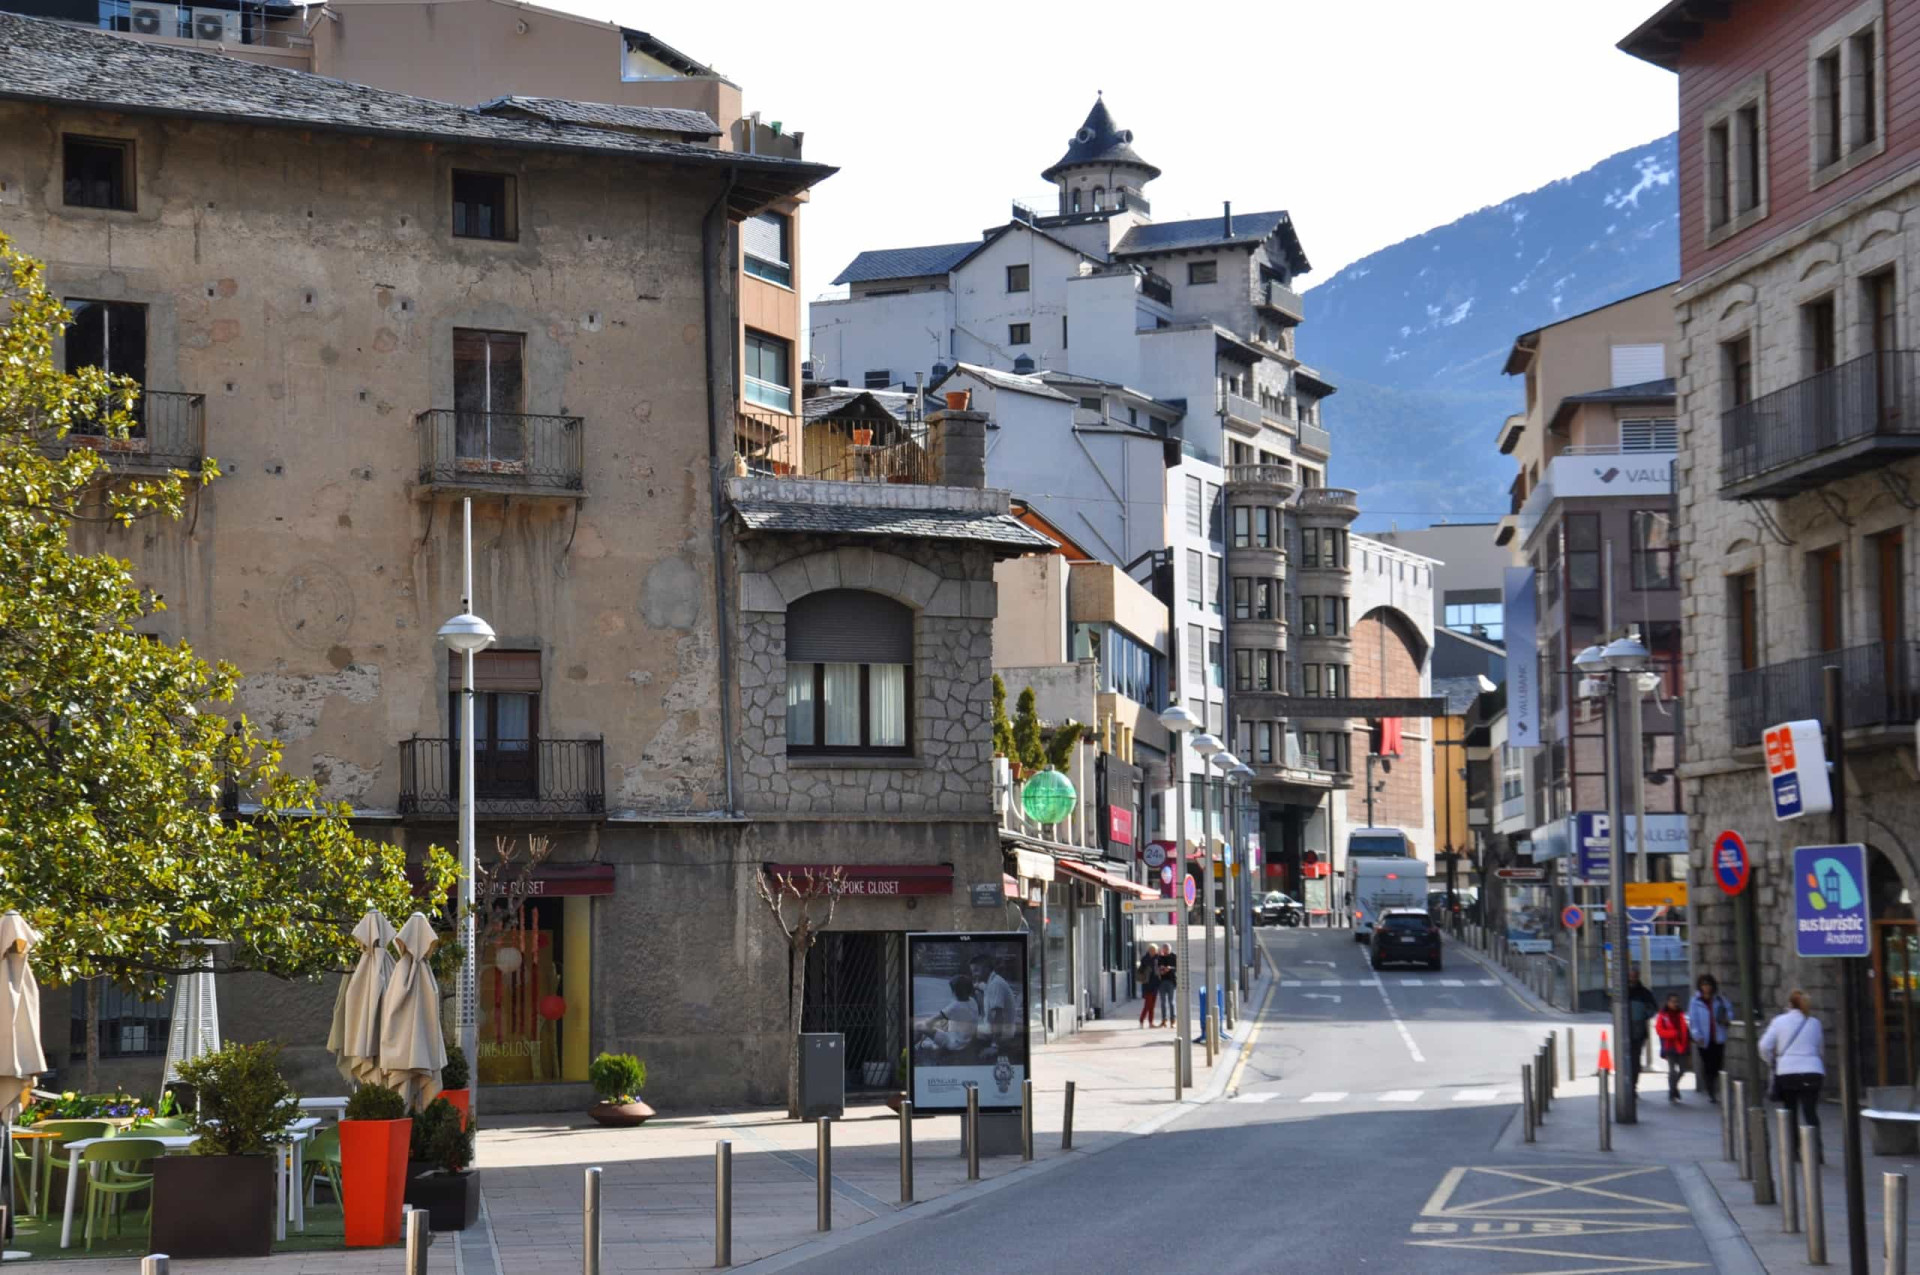 <p>After touring Casa de la Vall, visitors can stroll through the charming historic center of Andorra la Vella, filled with the sturdy and gorgeous original 16th- and 17th-century buildings that have stood the test of time.</p><p>You may also like: </p>